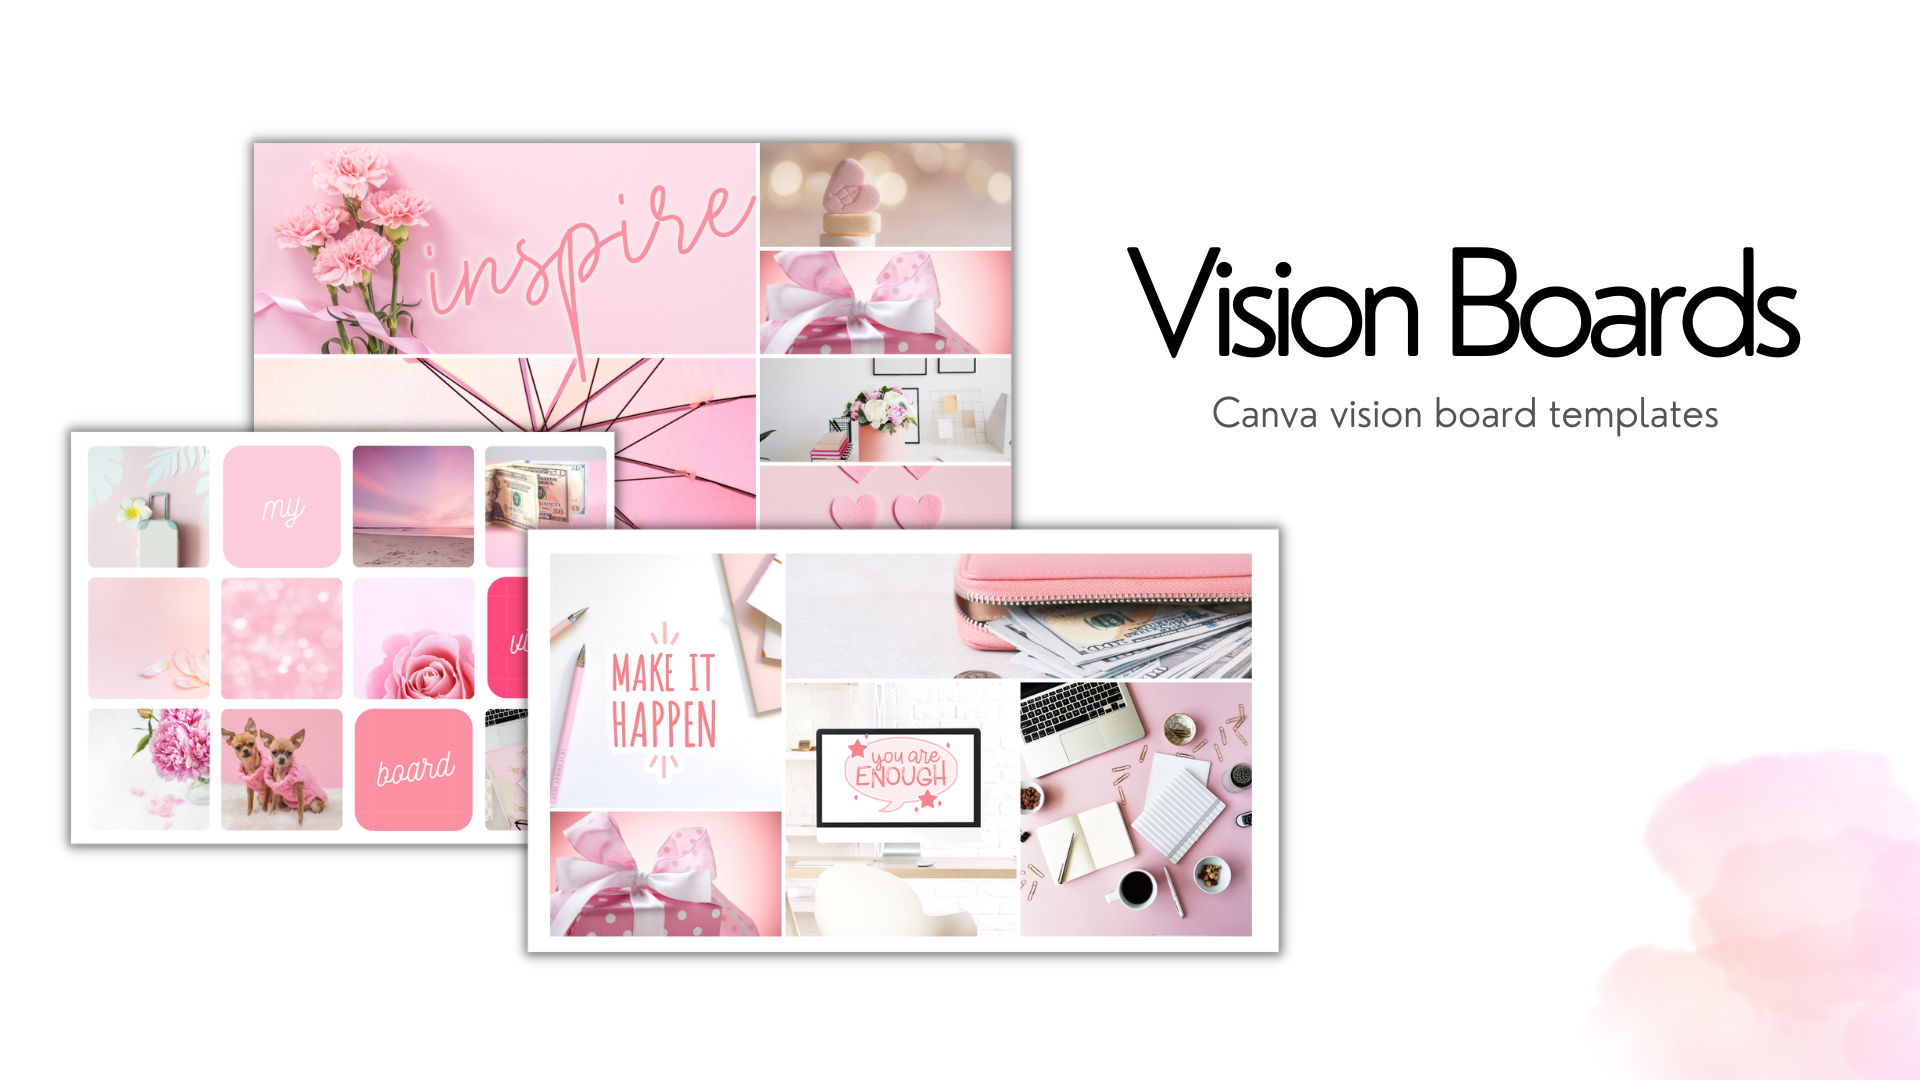 Dream, Design, Do! Enhance Your Course with a Vision Board Workshop